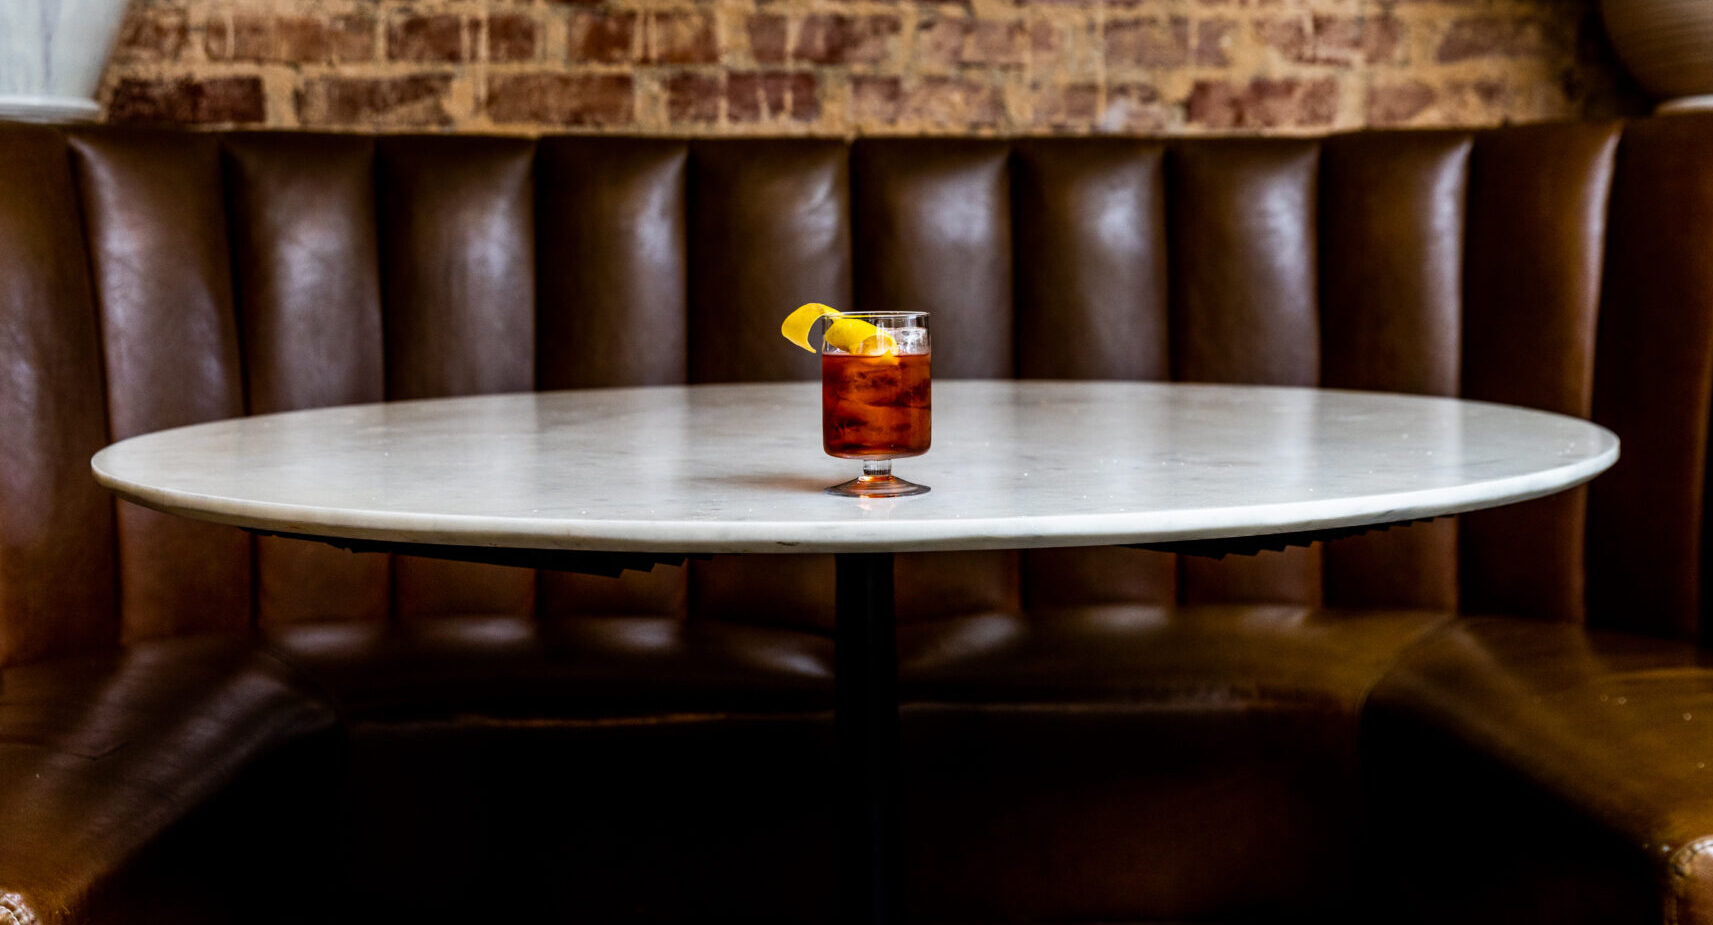 A fluted glass holds a negroni with a lemon twist on top of a white table in front of a brown booth.